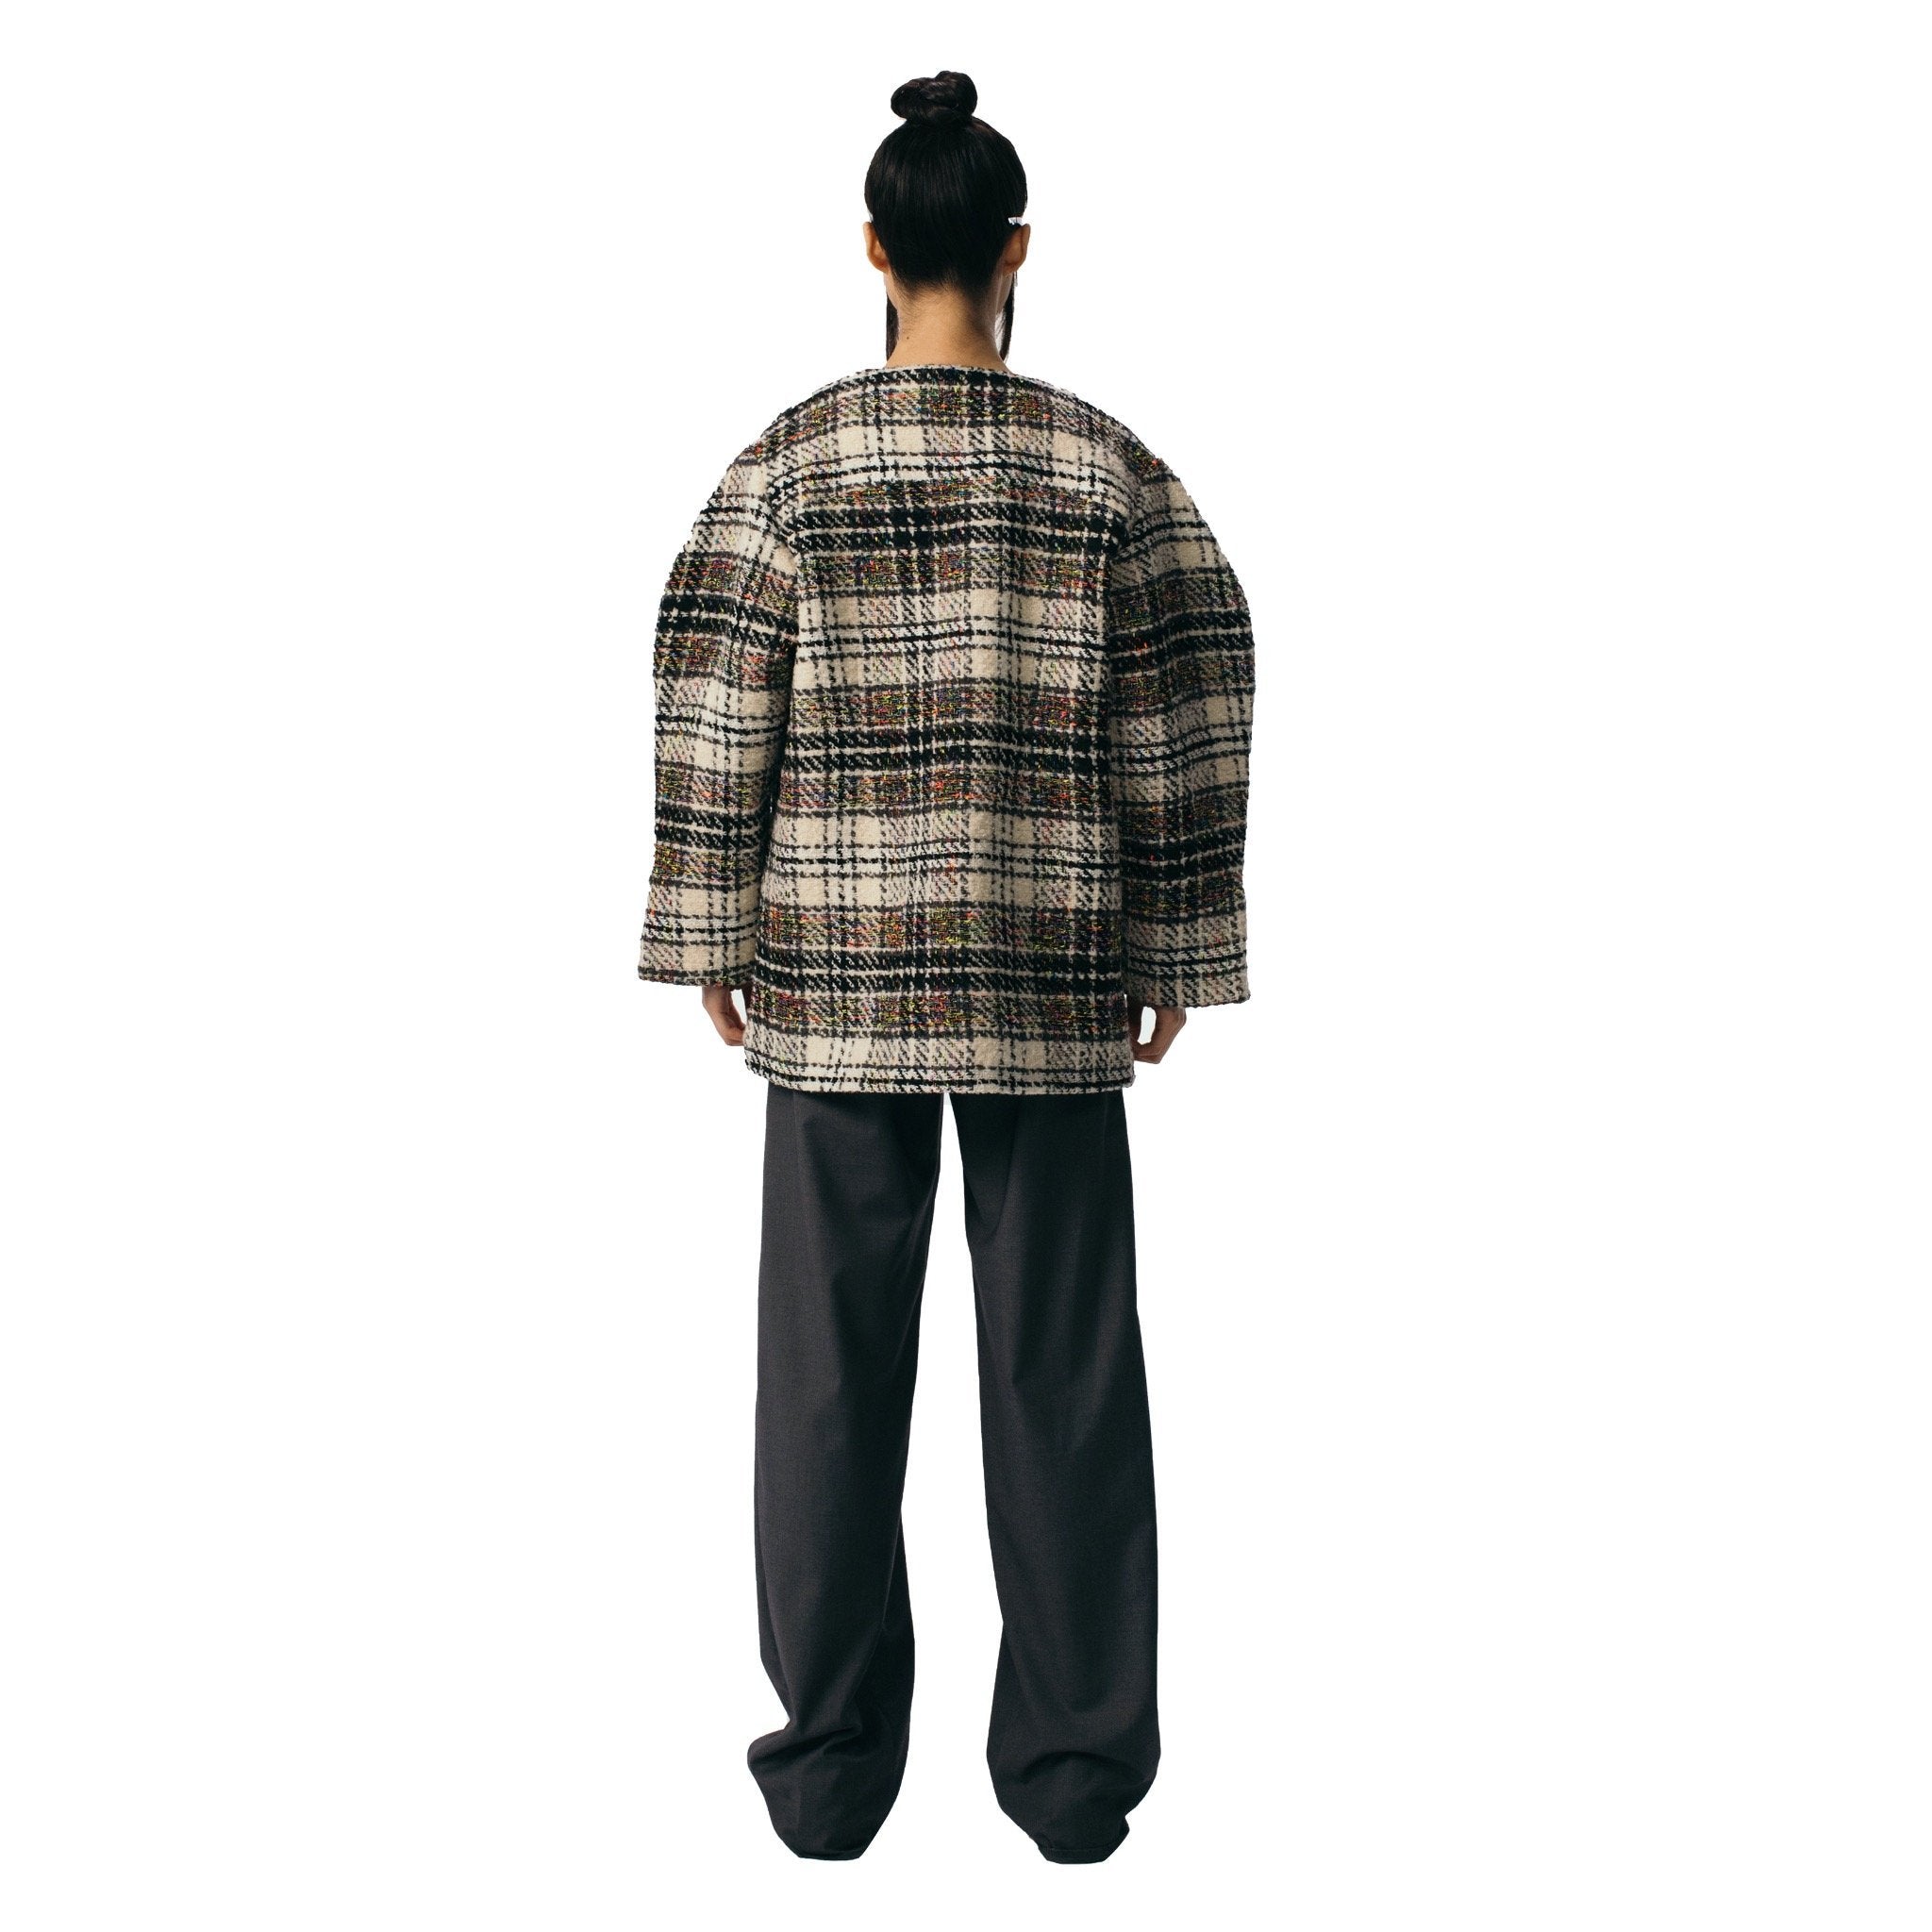 ANN ANDELMAN Light Brown Plaid Oversize Jacket | MADA IN CHINA